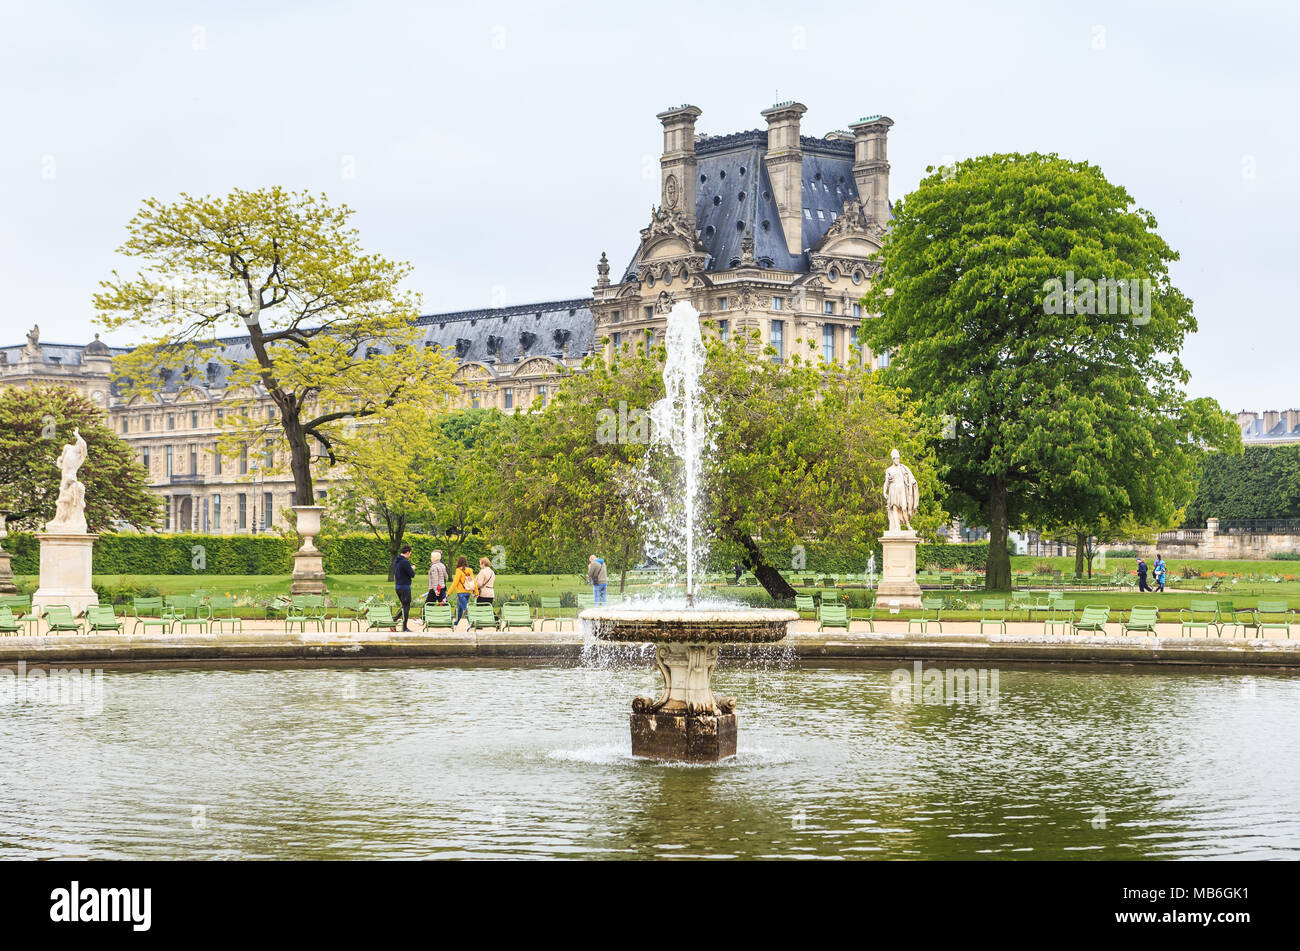 View of Louvre building from Tuileries garden. Louvre Museum is one of the largest and most visited museums worldwide. Stock Photo